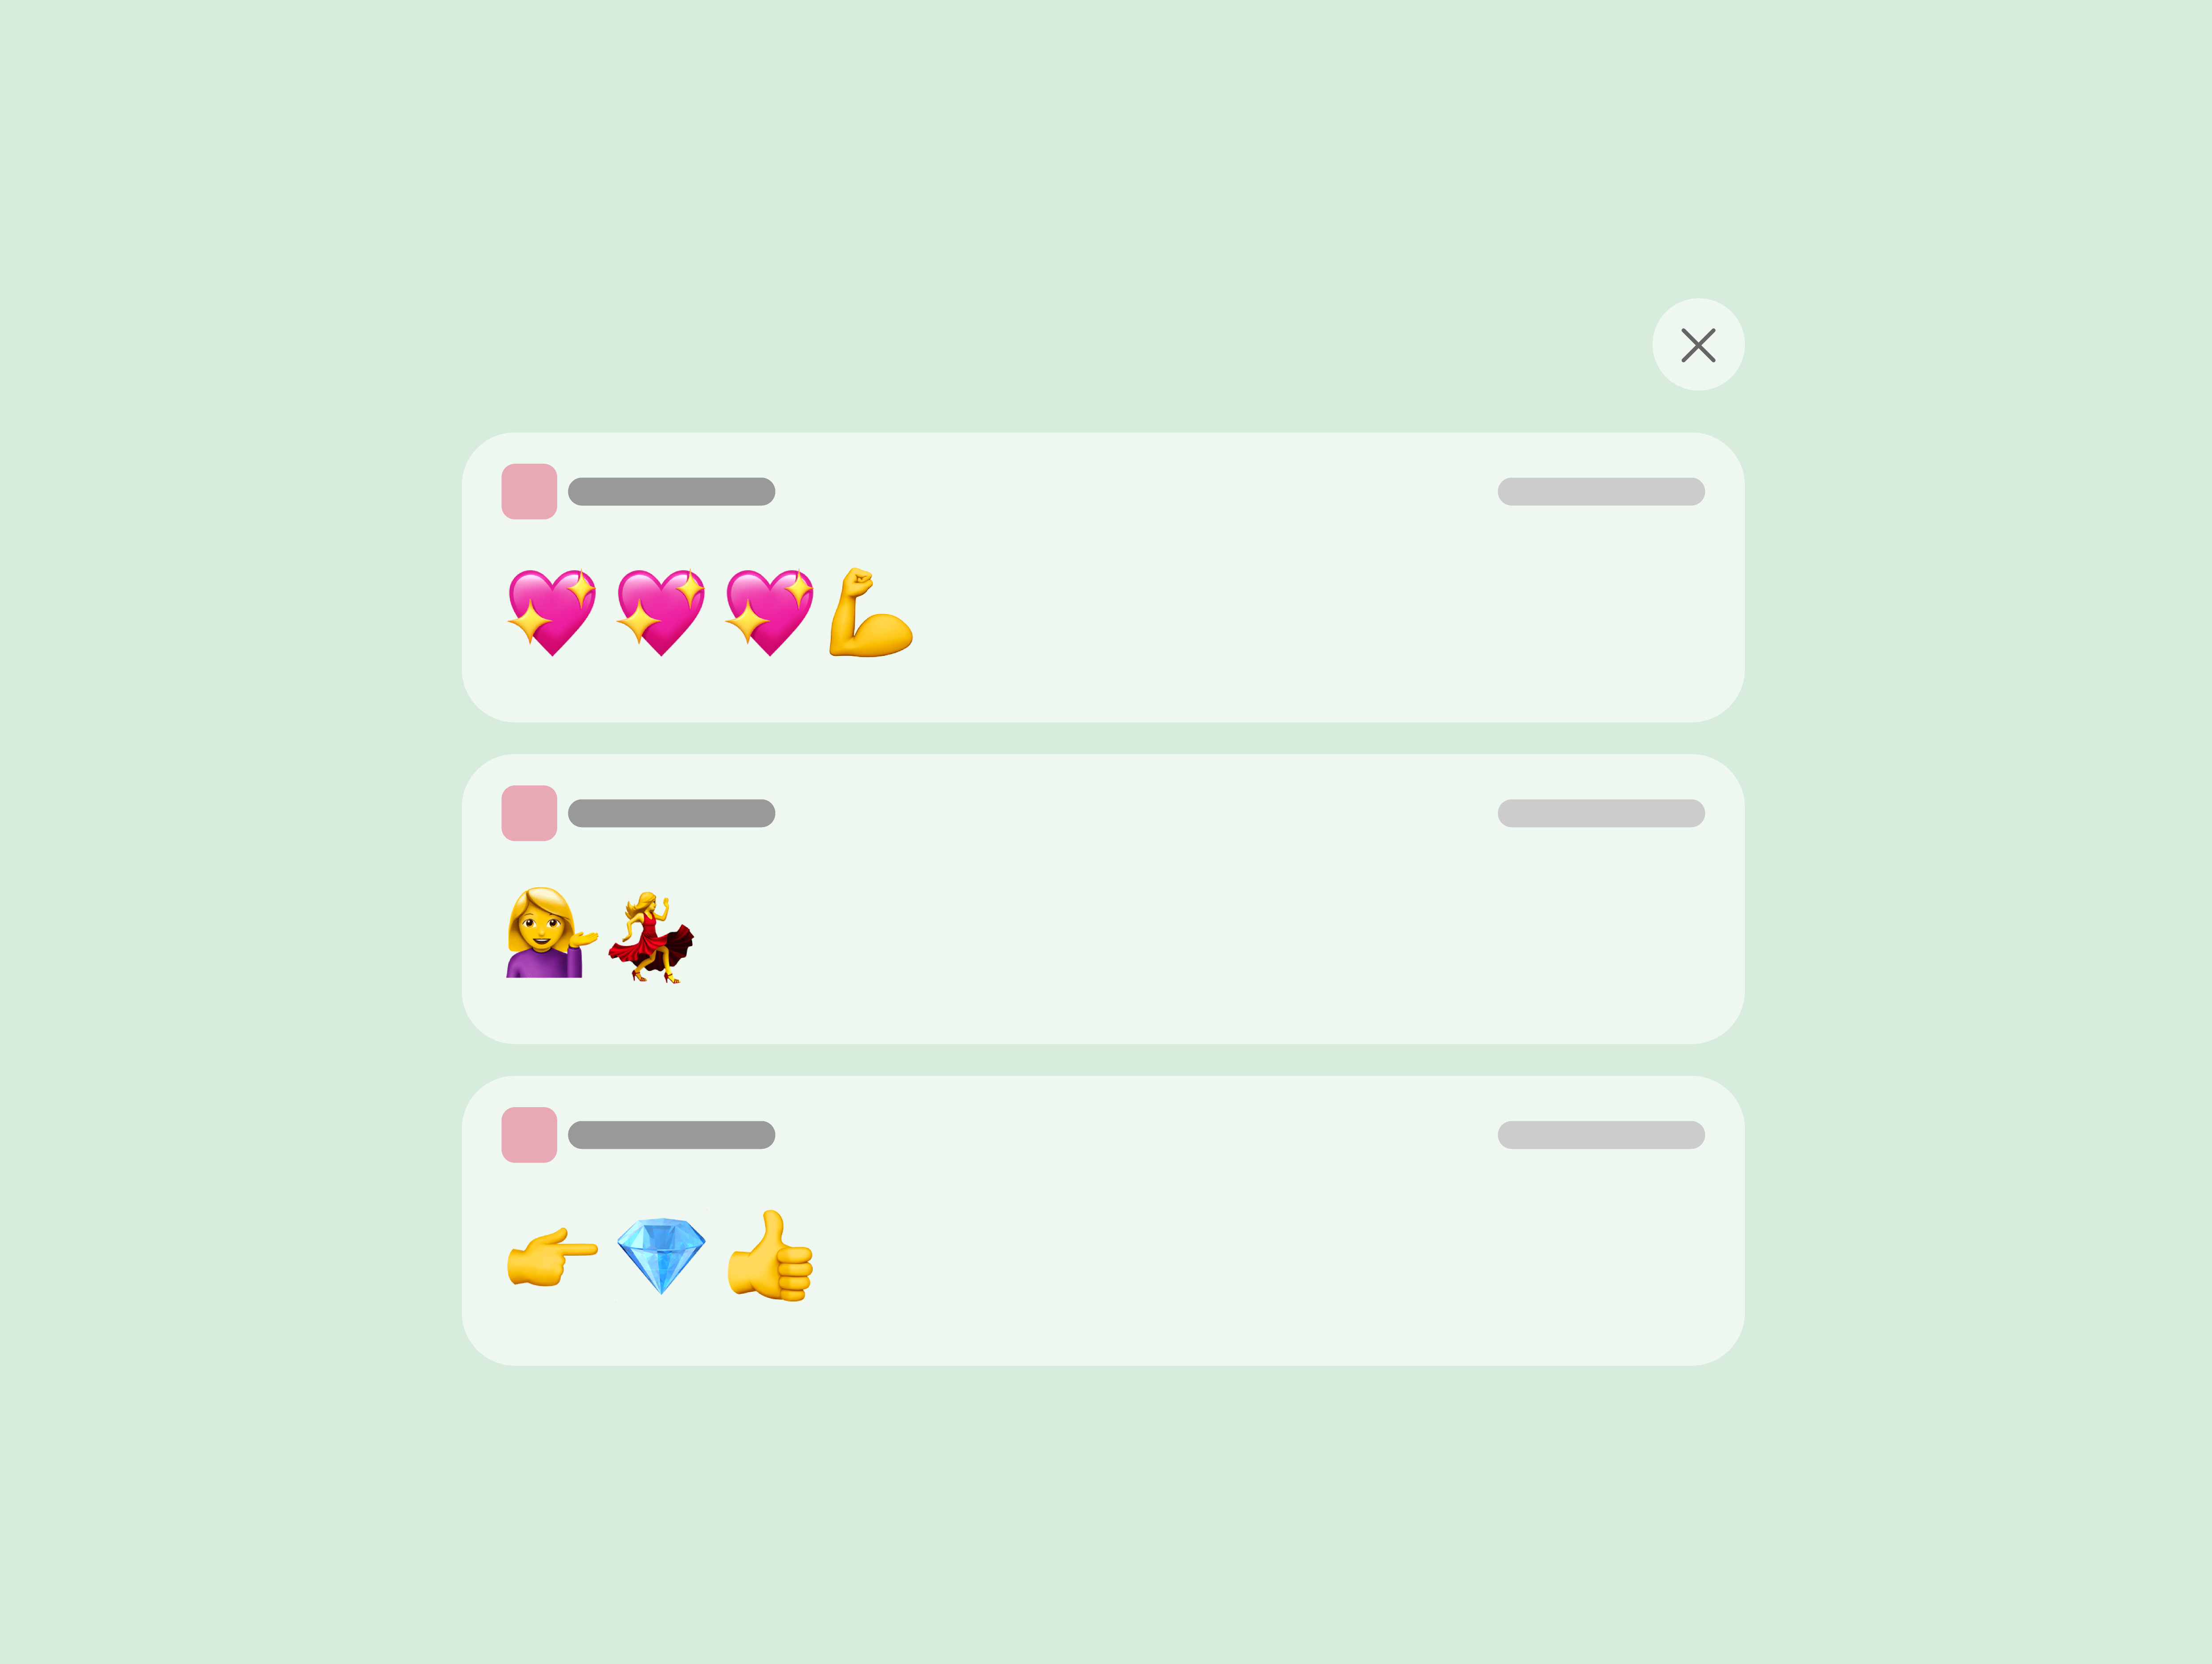 A screenshot of an app with emoticons on it - Positivity